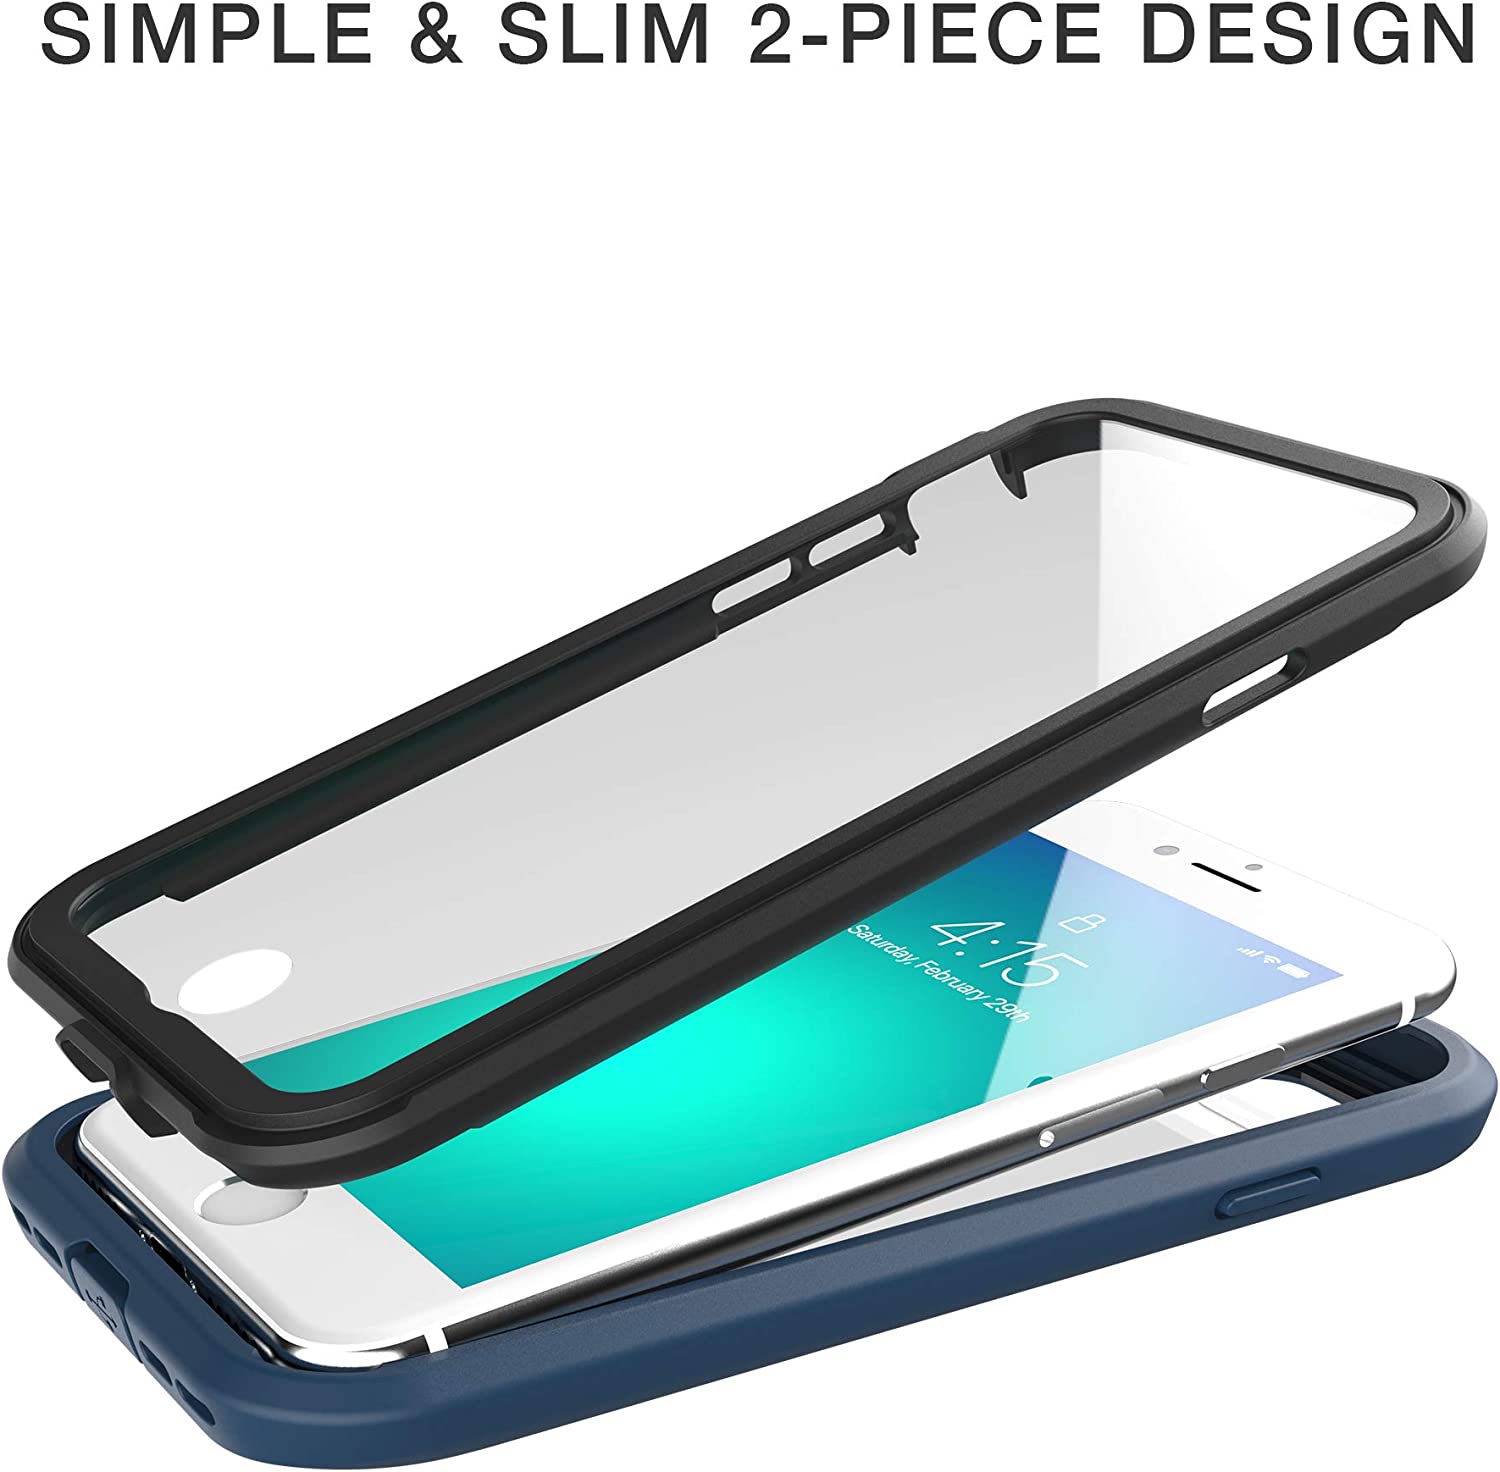 Shield: Metal Travel Case for iPhone 6/6s - Hitcase